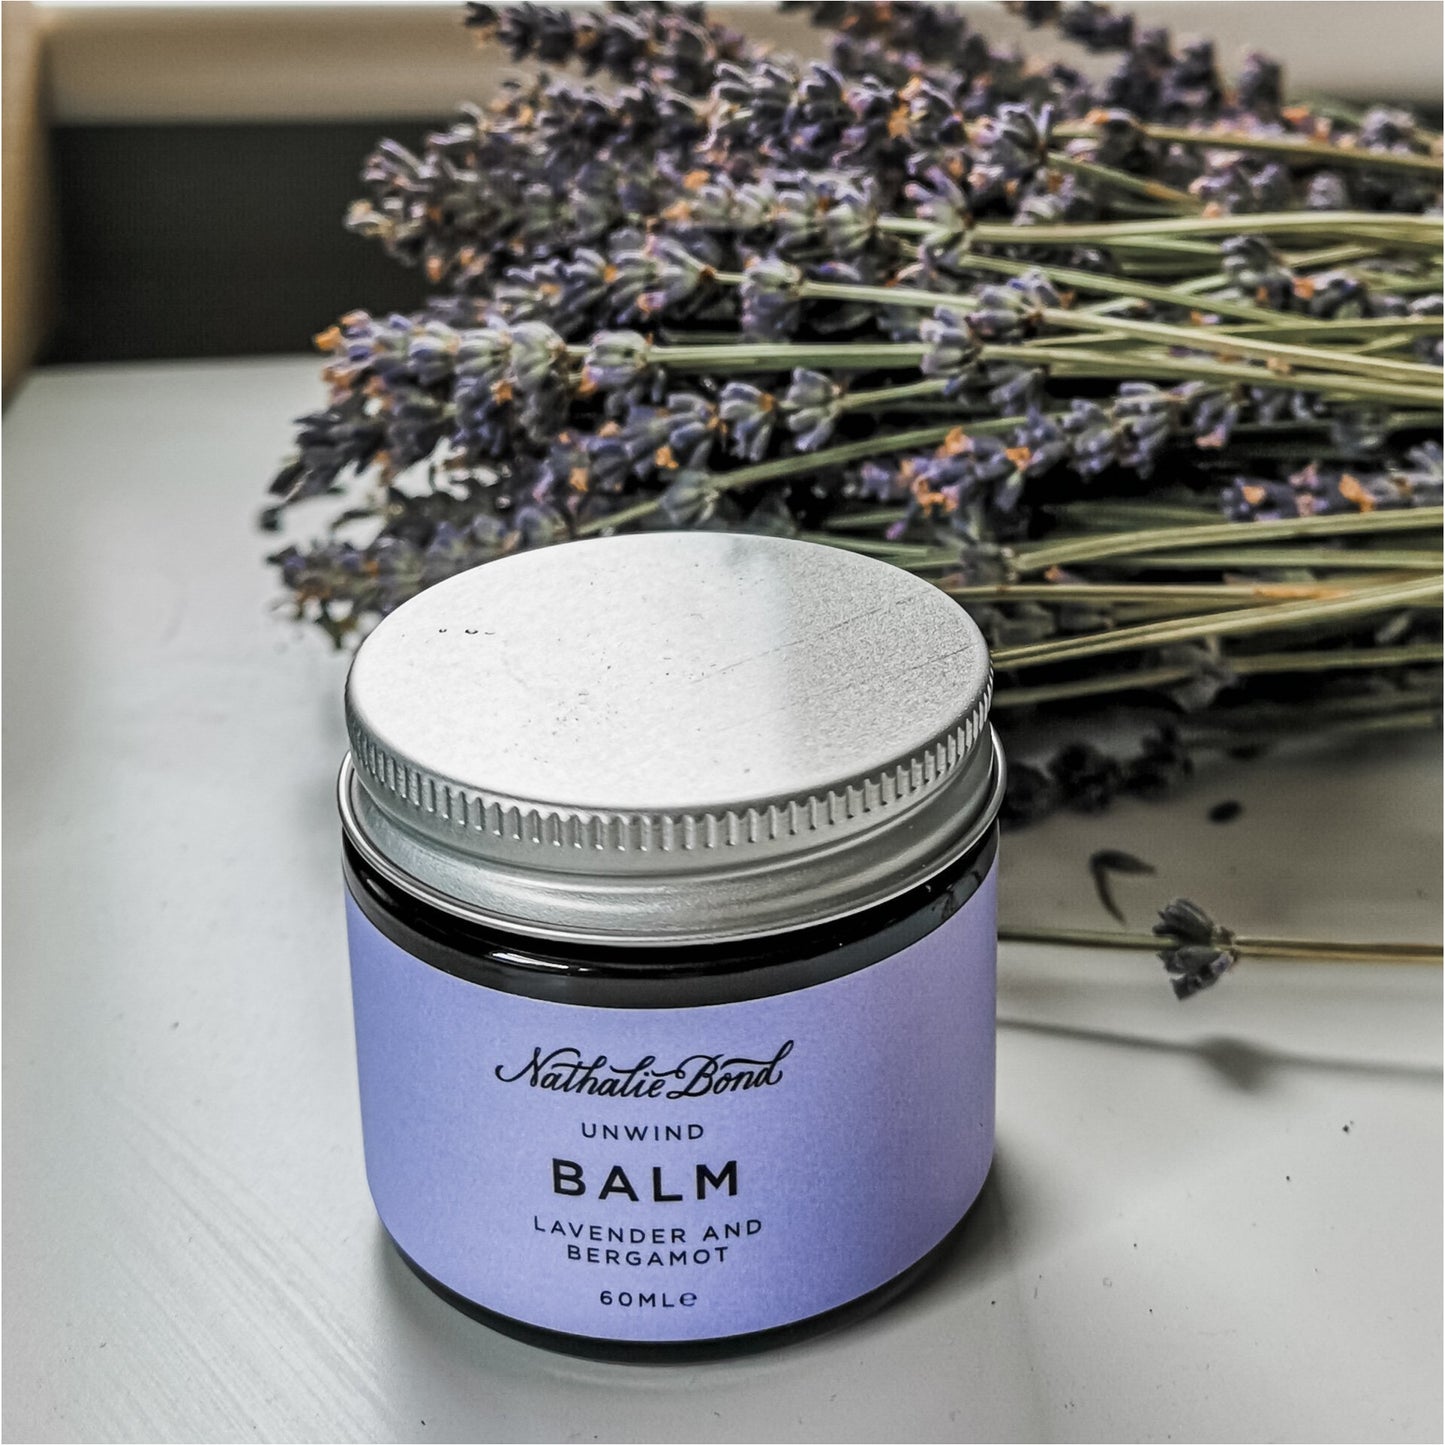 Unwind Balm Buy at Out of the Box Gifts